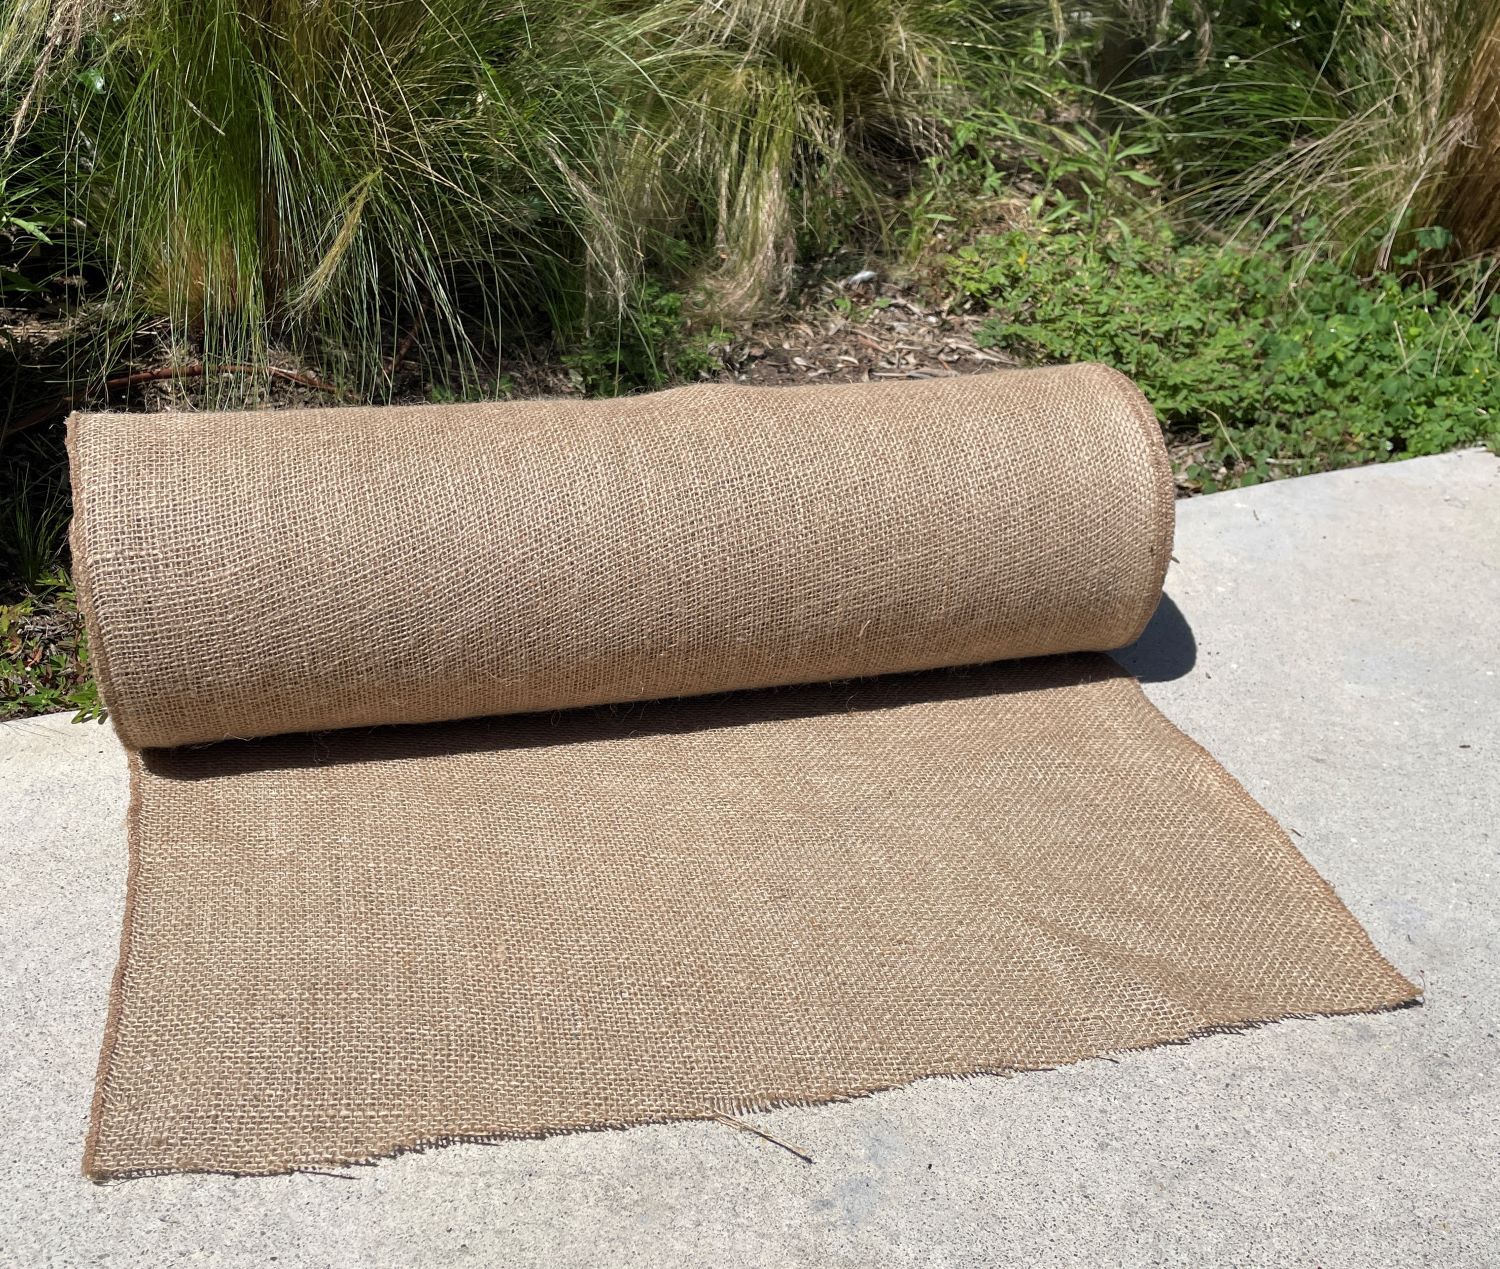 Burlap Roll Natural Burlap Fabric Multipurpose Rustic Fabric Roll for  Garden Wedding Table Runners Home Party Decor (63 Inch x 30 Feet)